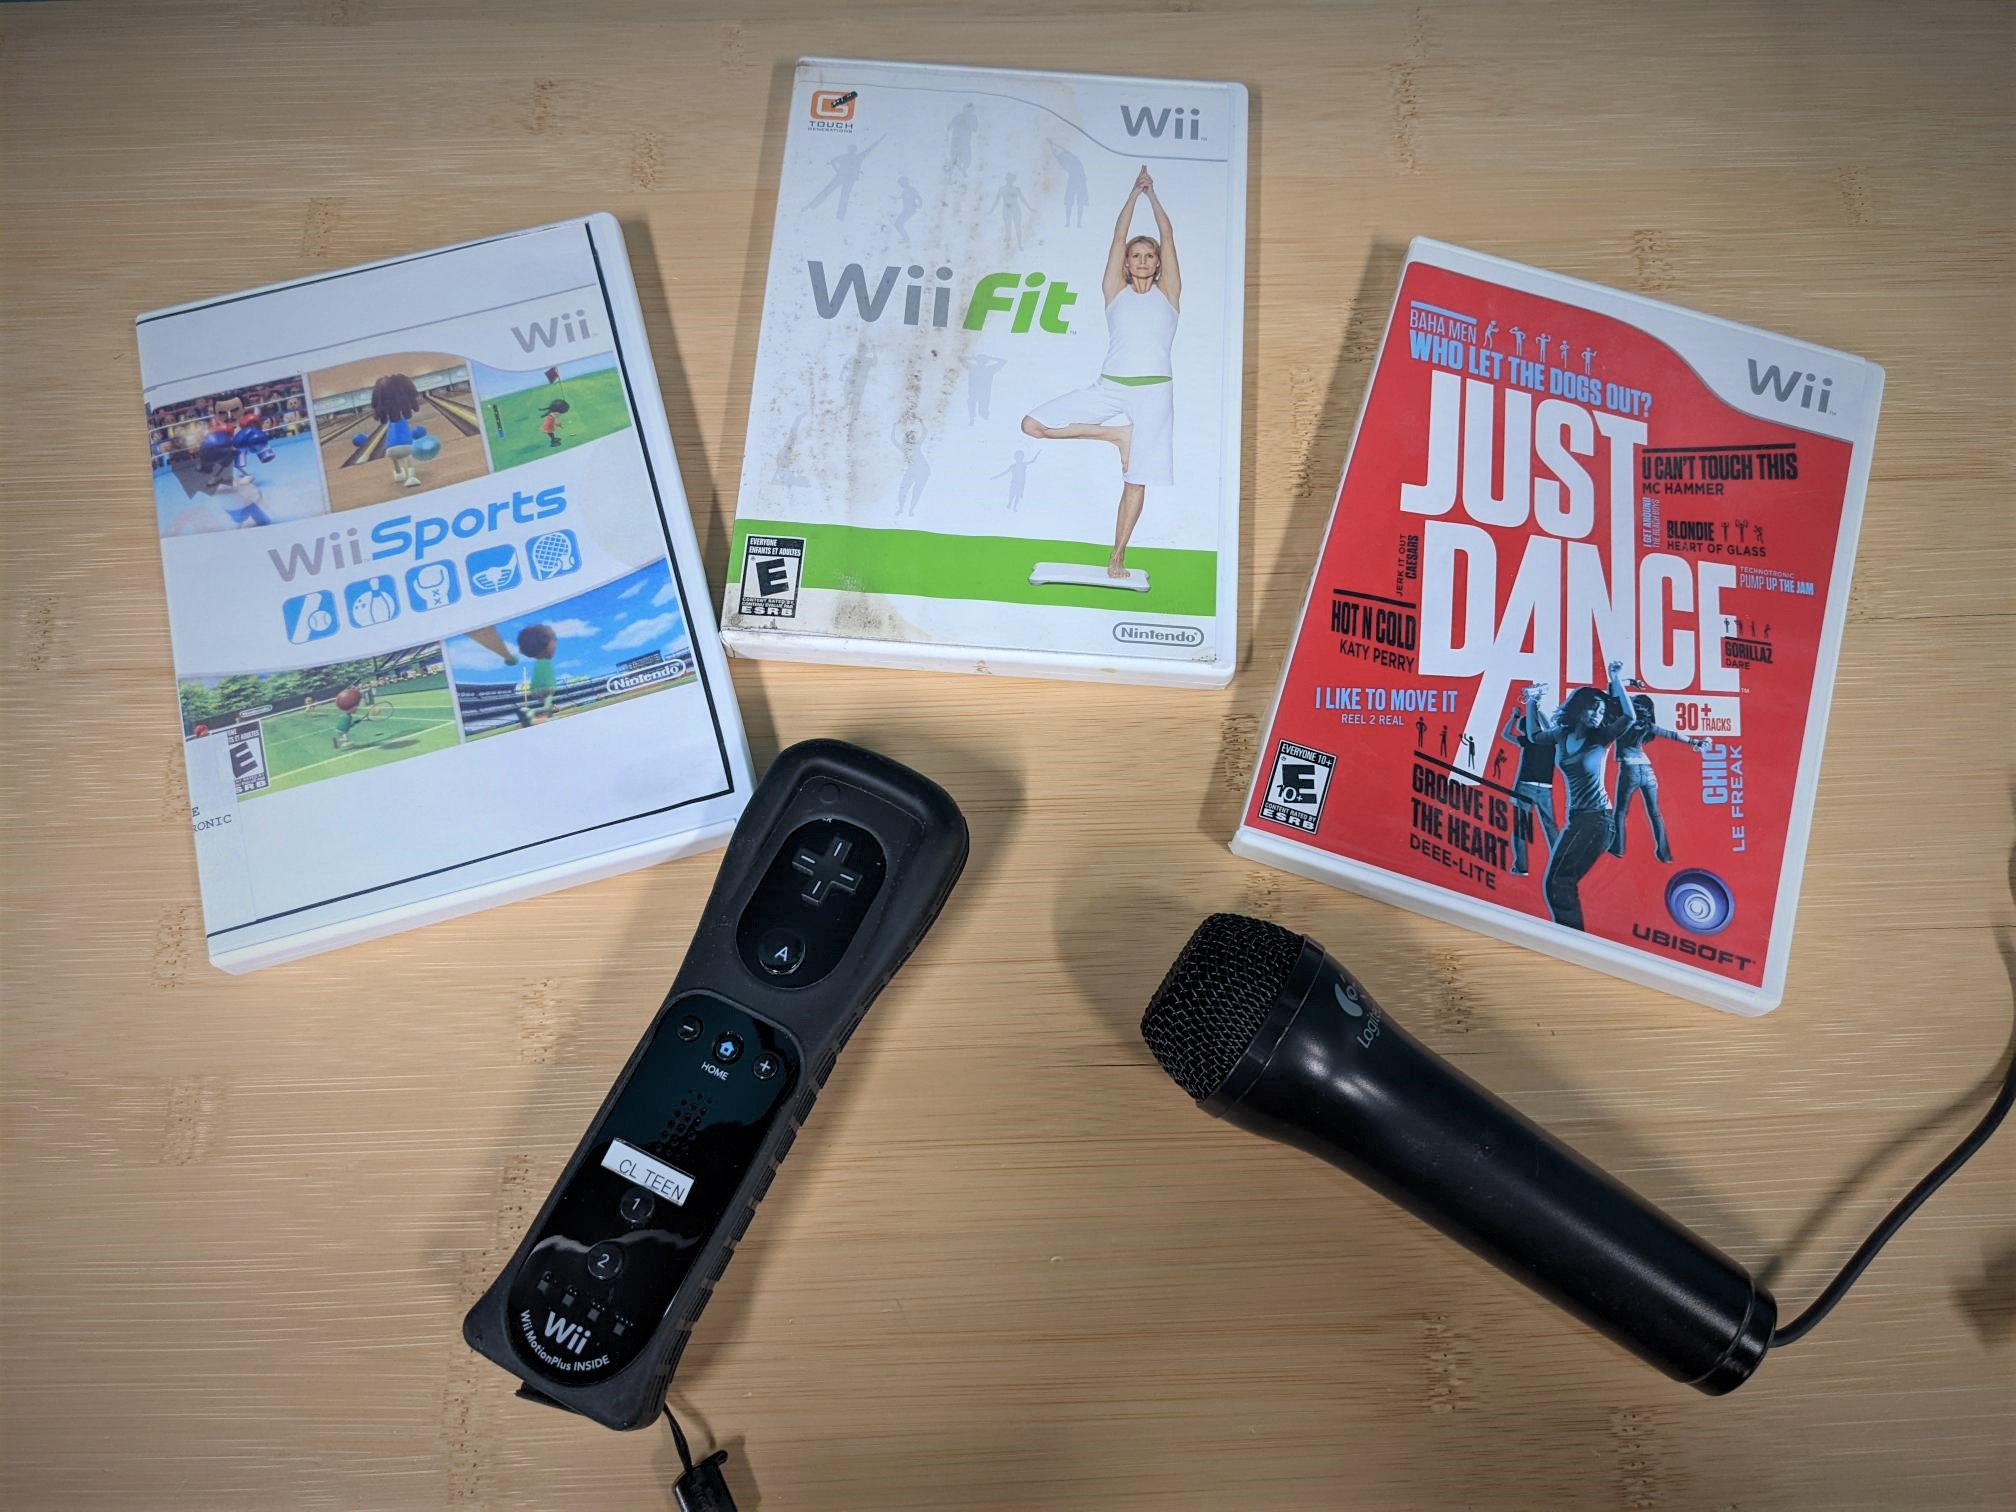 Wii Sports case, Will Fit case, Just Dance Wii case, Wii mote, and Wii karaoke microphone